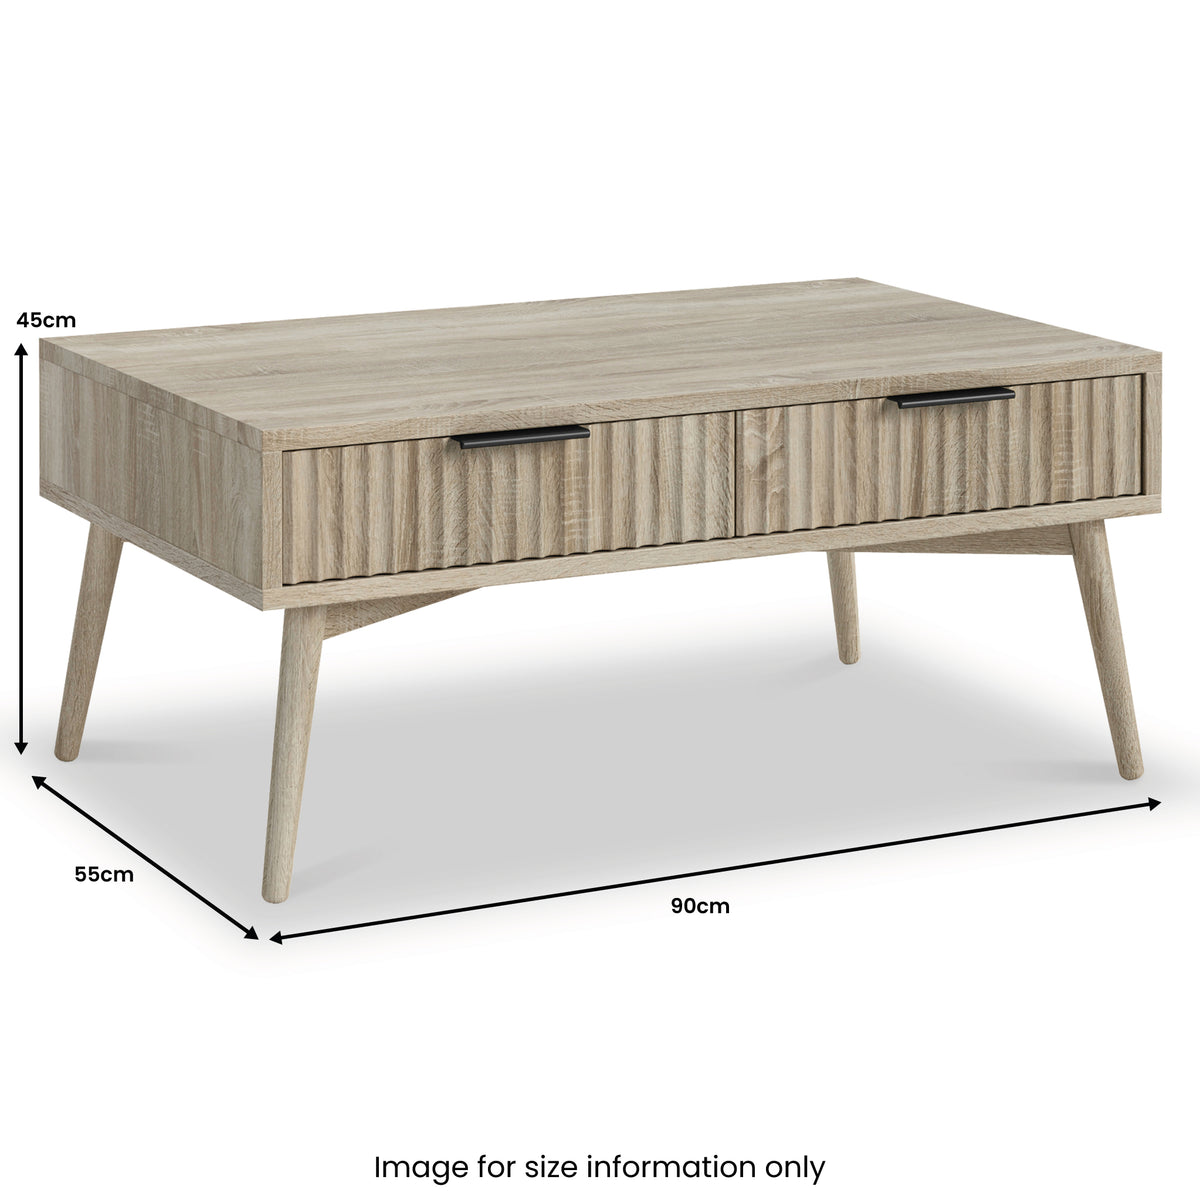 Jakob Oak 2 Drawer Grooved Coffee Table dimensions